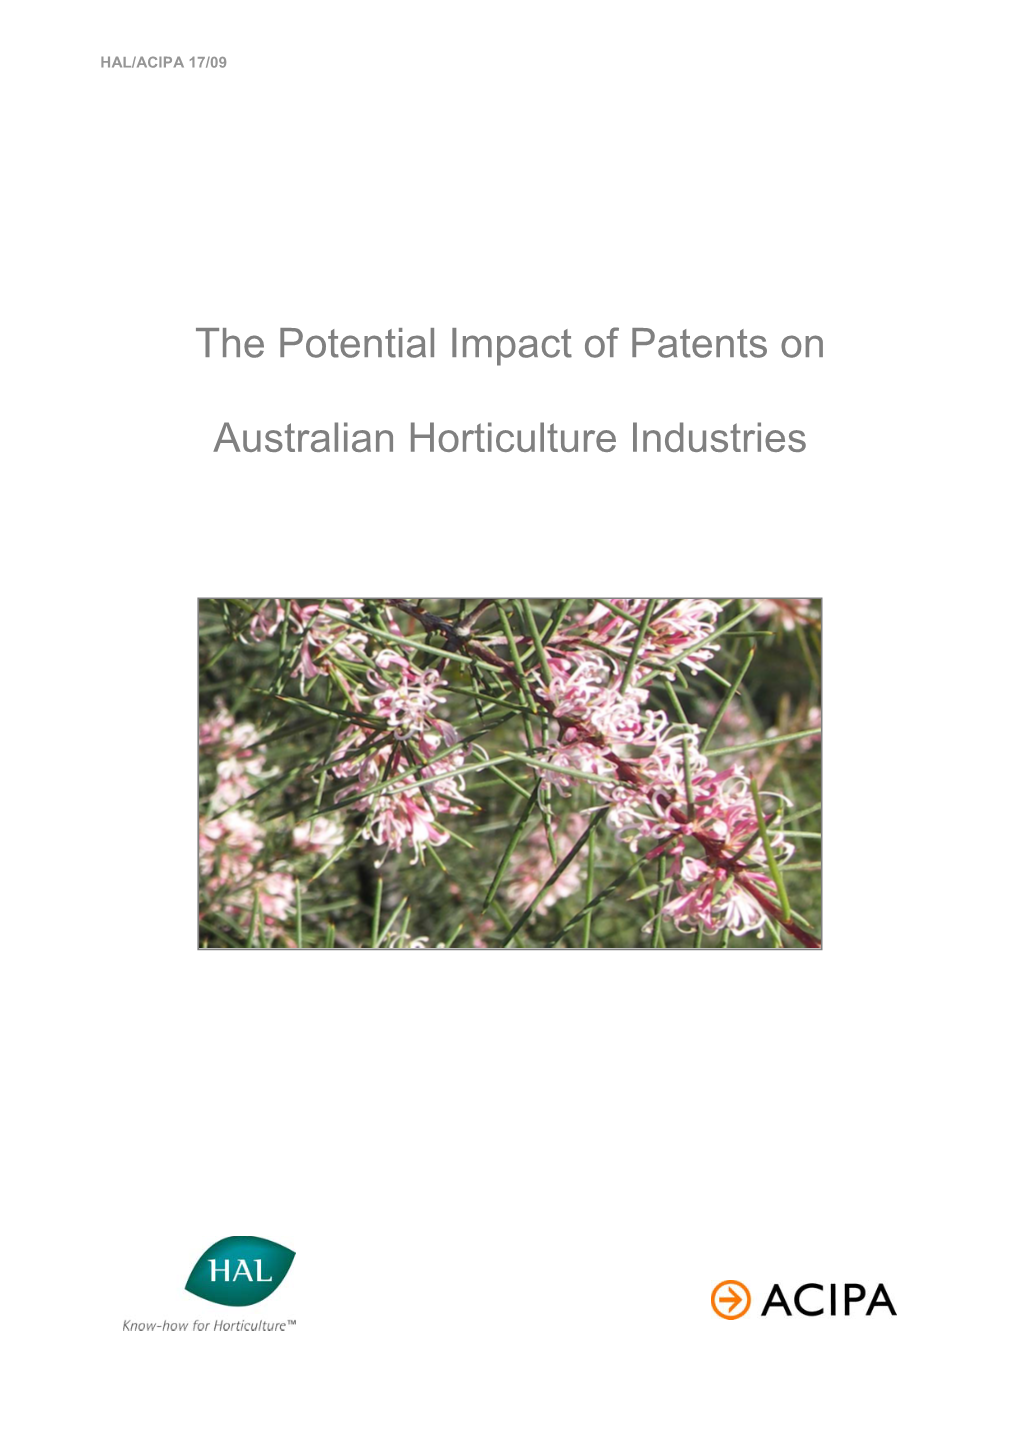 The Potential Impact of Patents on Australian Horticulture Industries